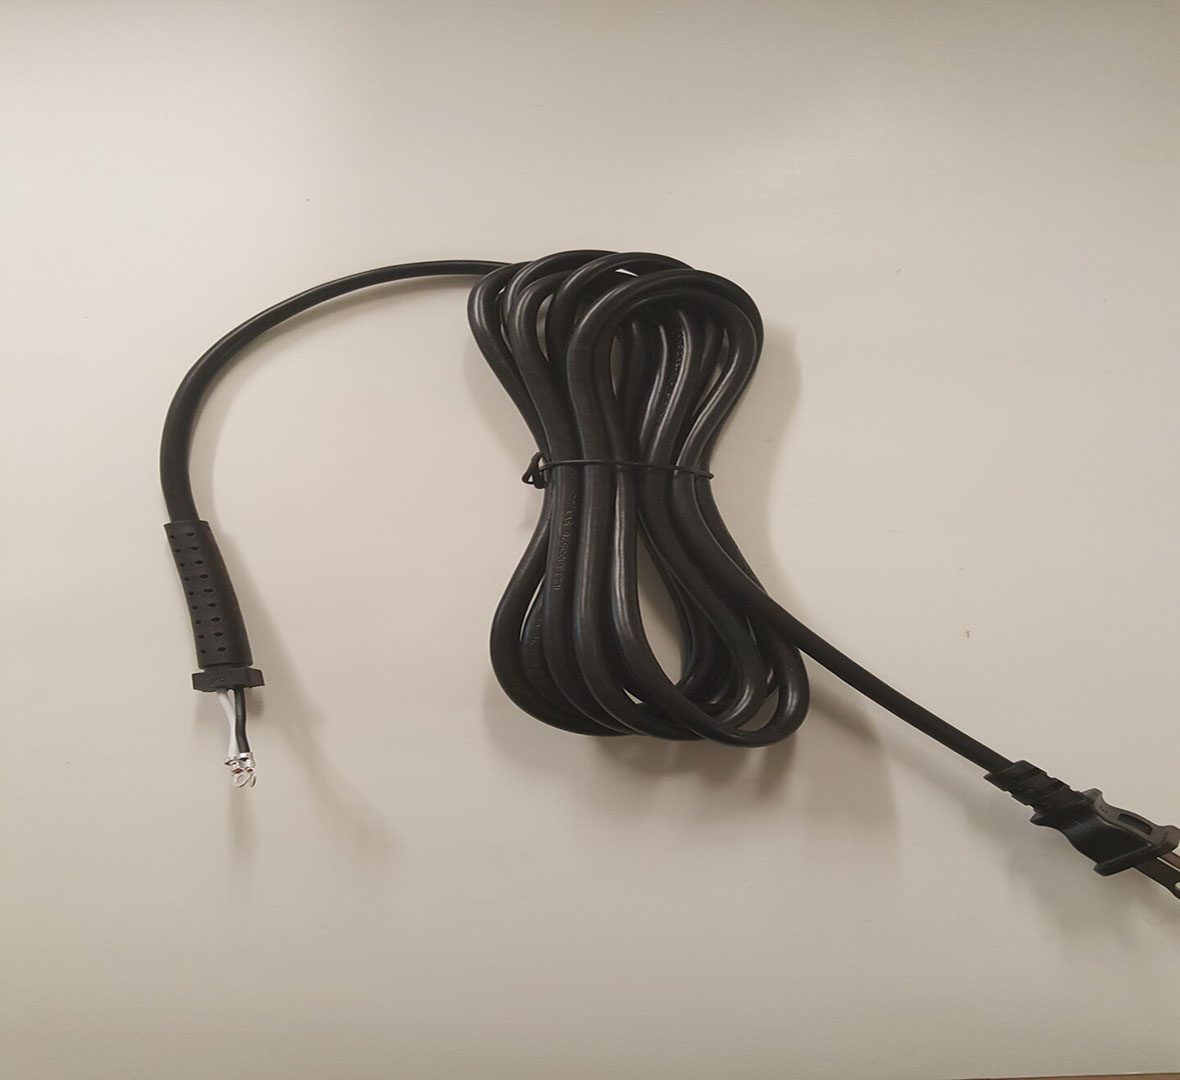 A black cord with an ear bud hanging on it.